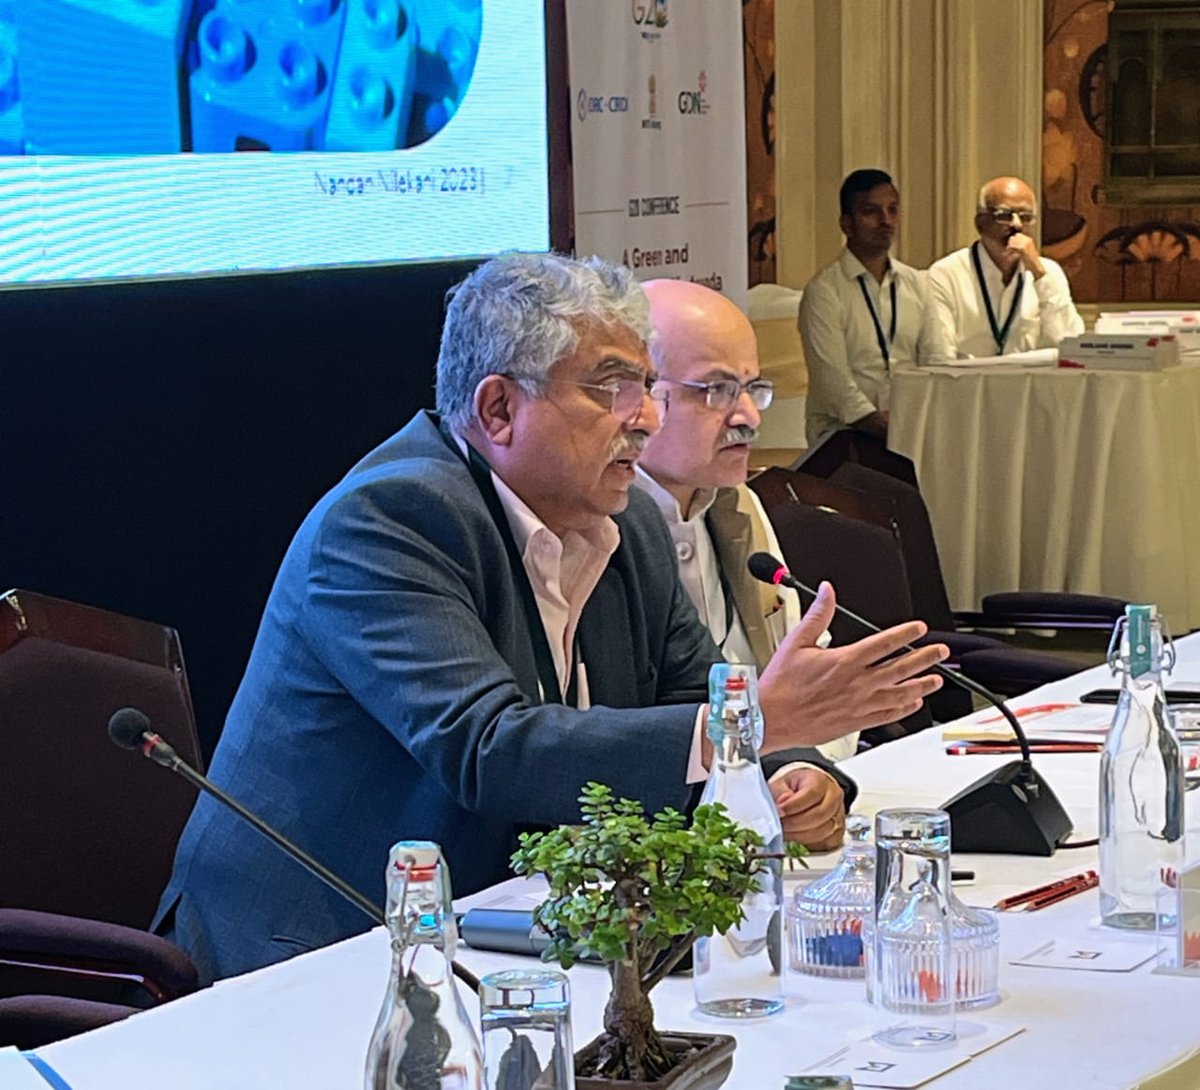 Digital Public Infrastructure accelerated financial inclusion in India in 9 years what could have been done in 47 years without it: @NandanNilekani during his keynote address at the #G20 Conference on #GreenGrowth #PMO